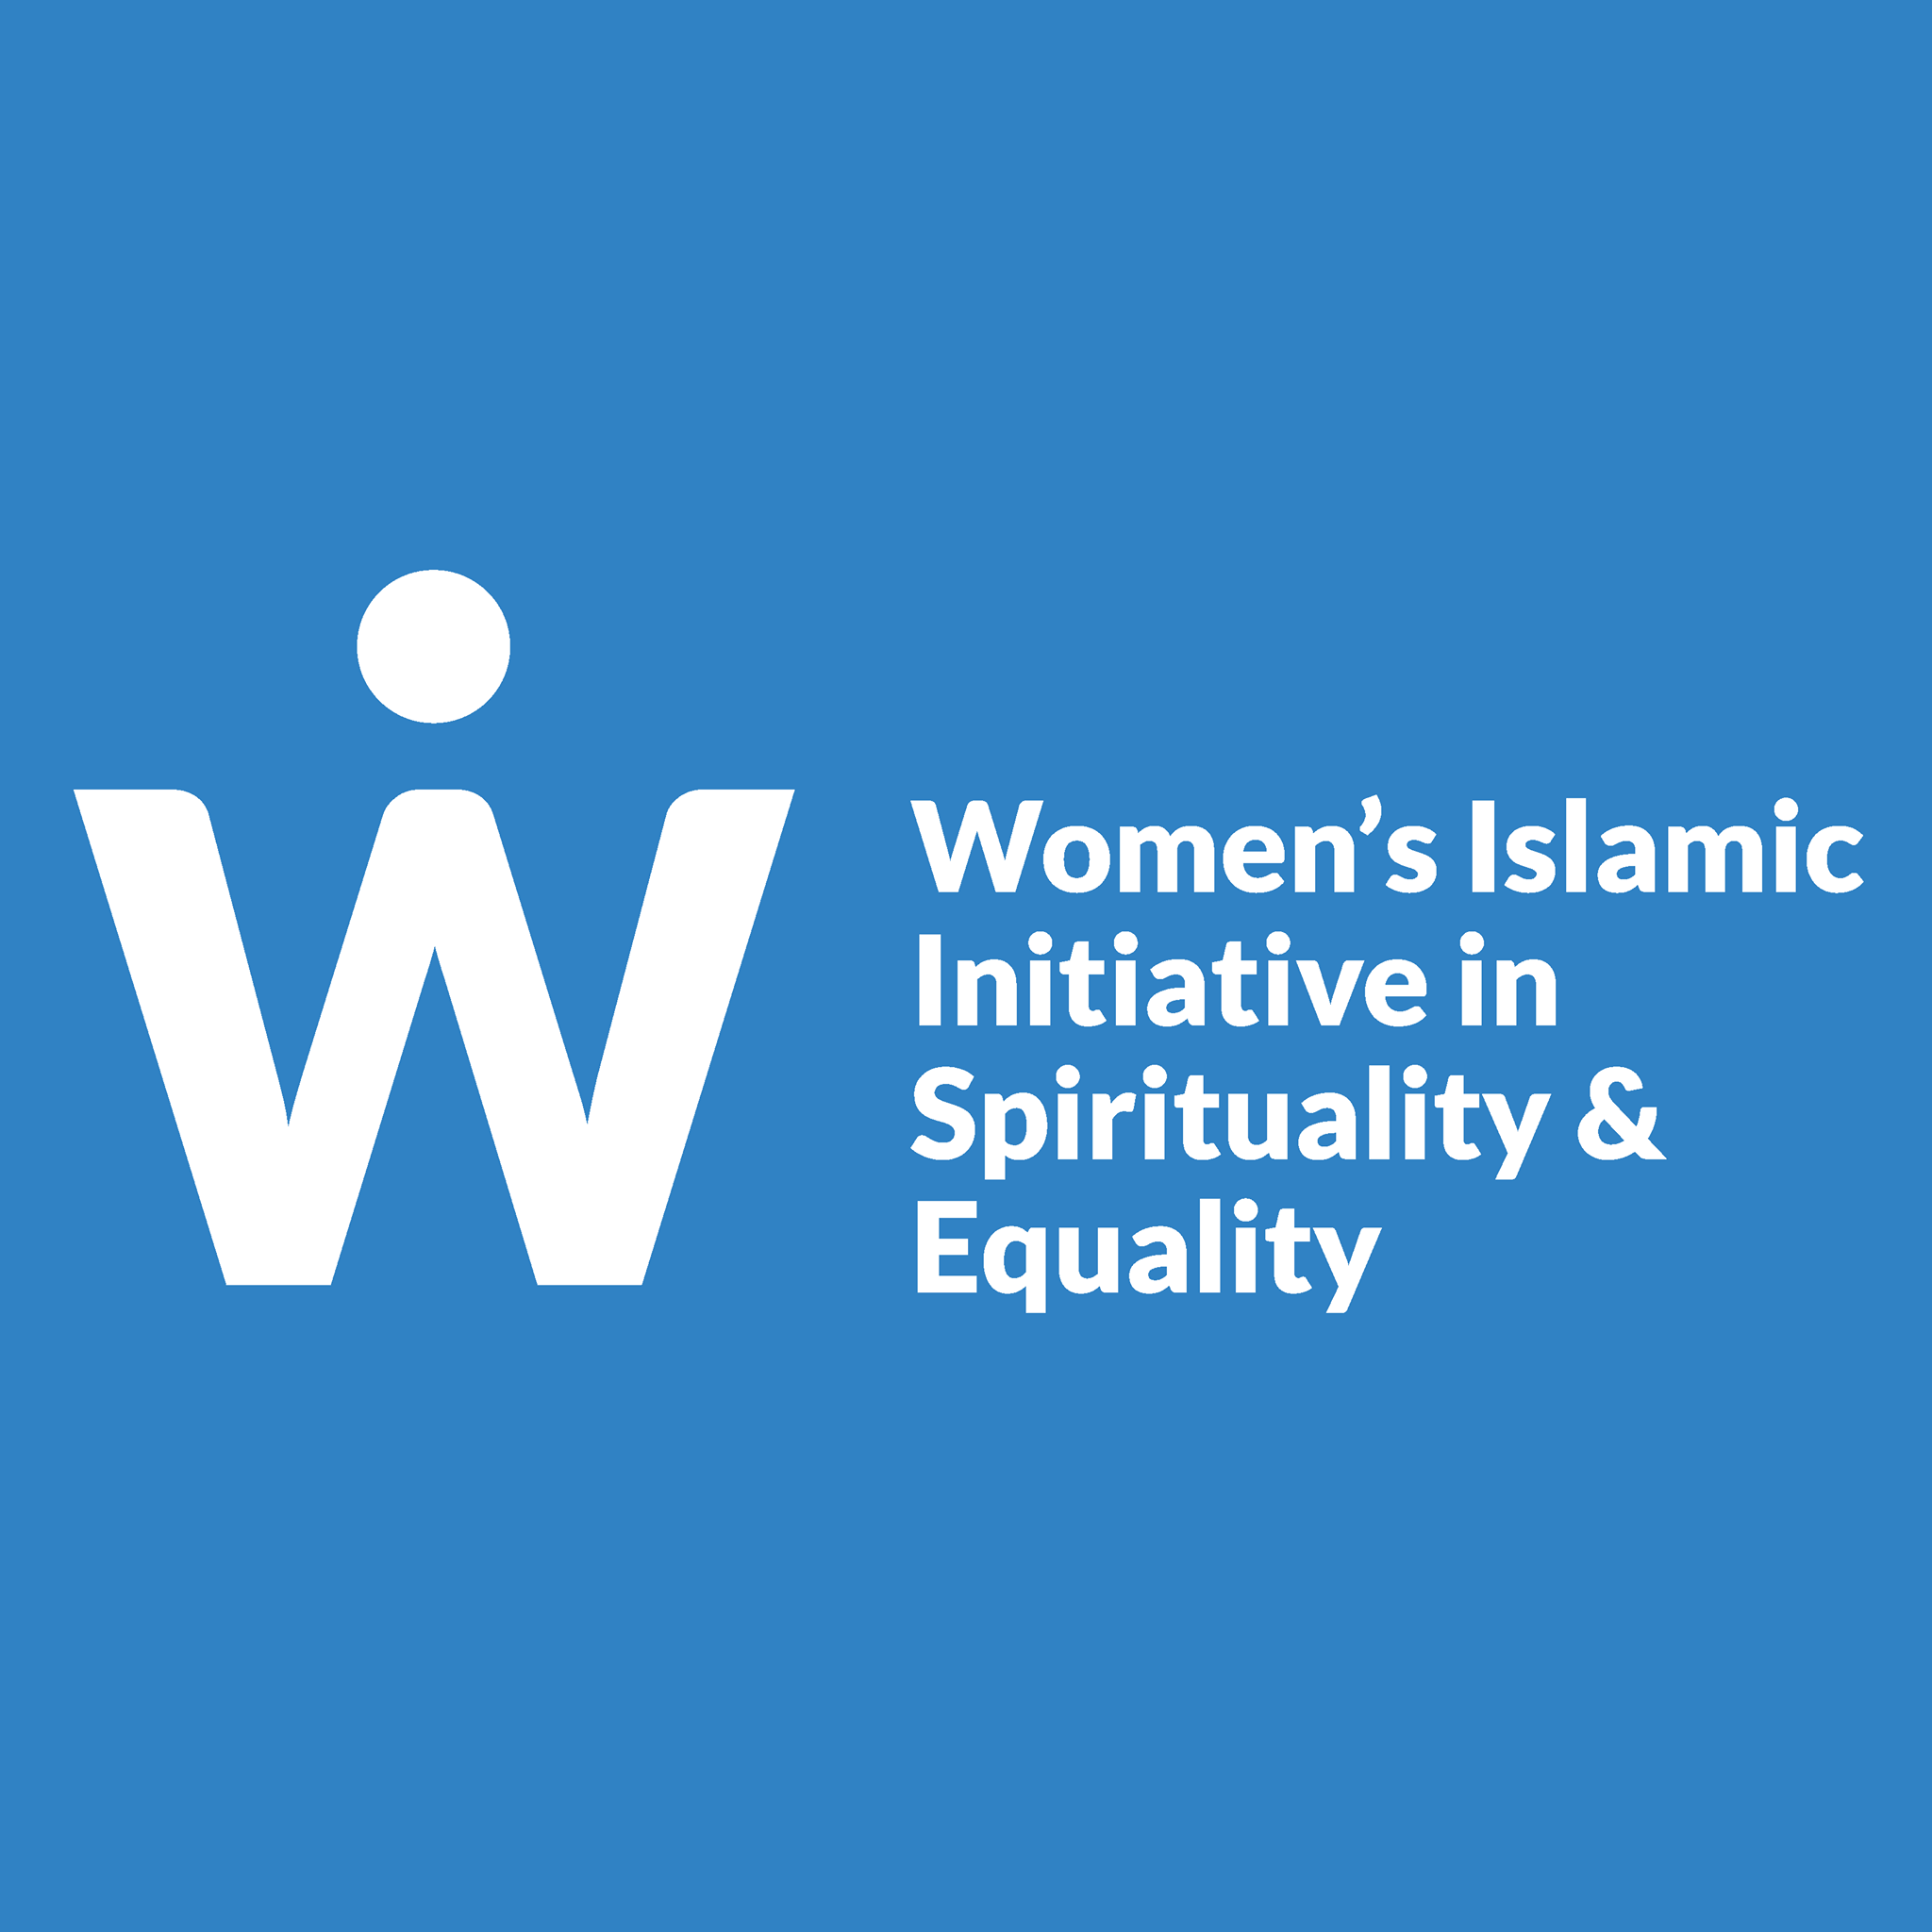 Female Religious Organizations in USA - Women's Islamic Initiative in Spirituality and Equality